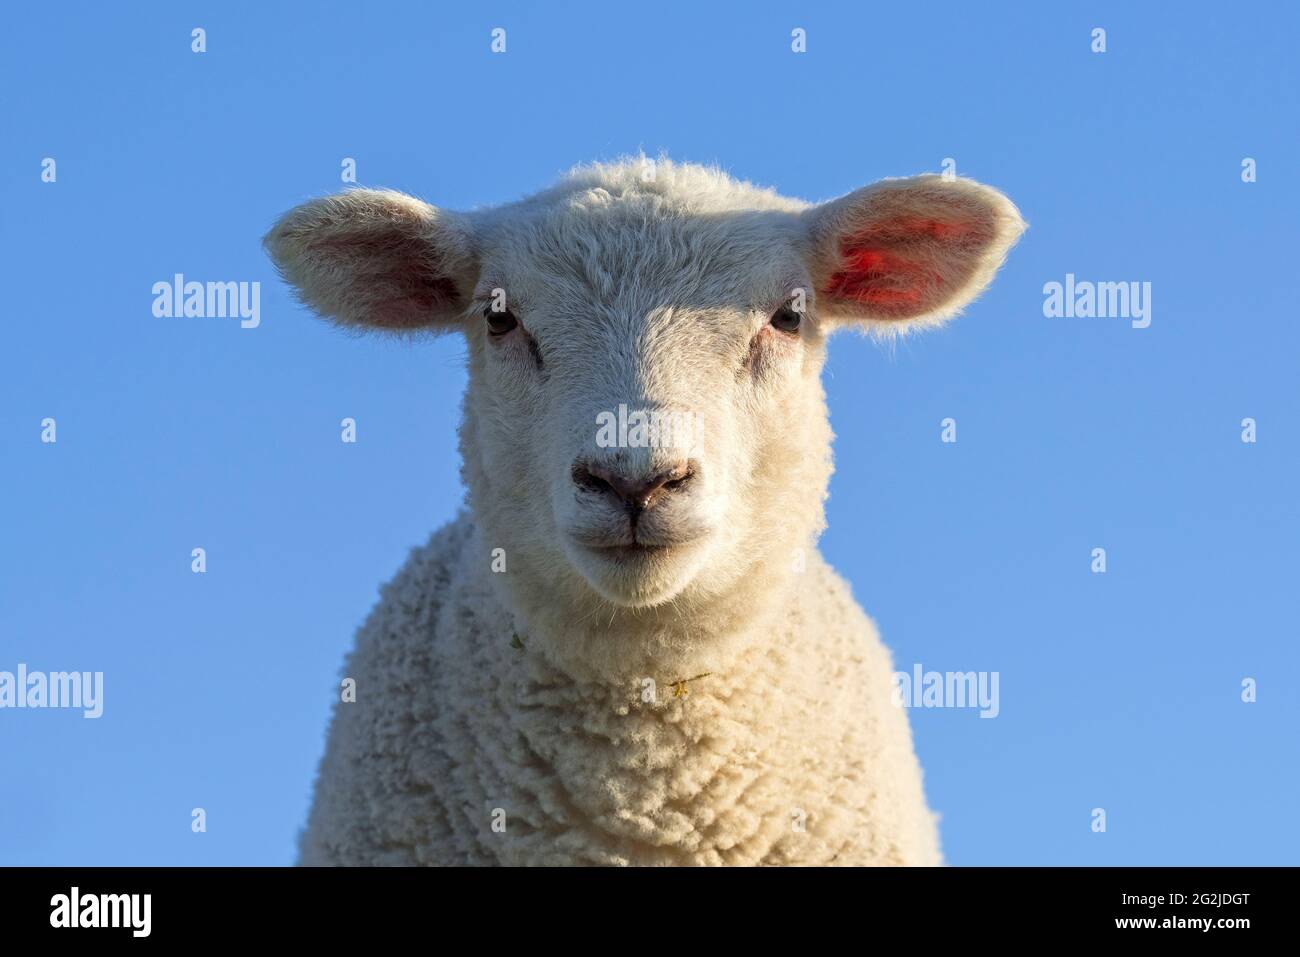 Sheep against a blue sky, on the dike at Westerhever, Eiderstedt peninsula, Schleswig-Holstein Wadden Sea National Park, Germany, Schleswig-Holstein, North Sea coast Stock Photo